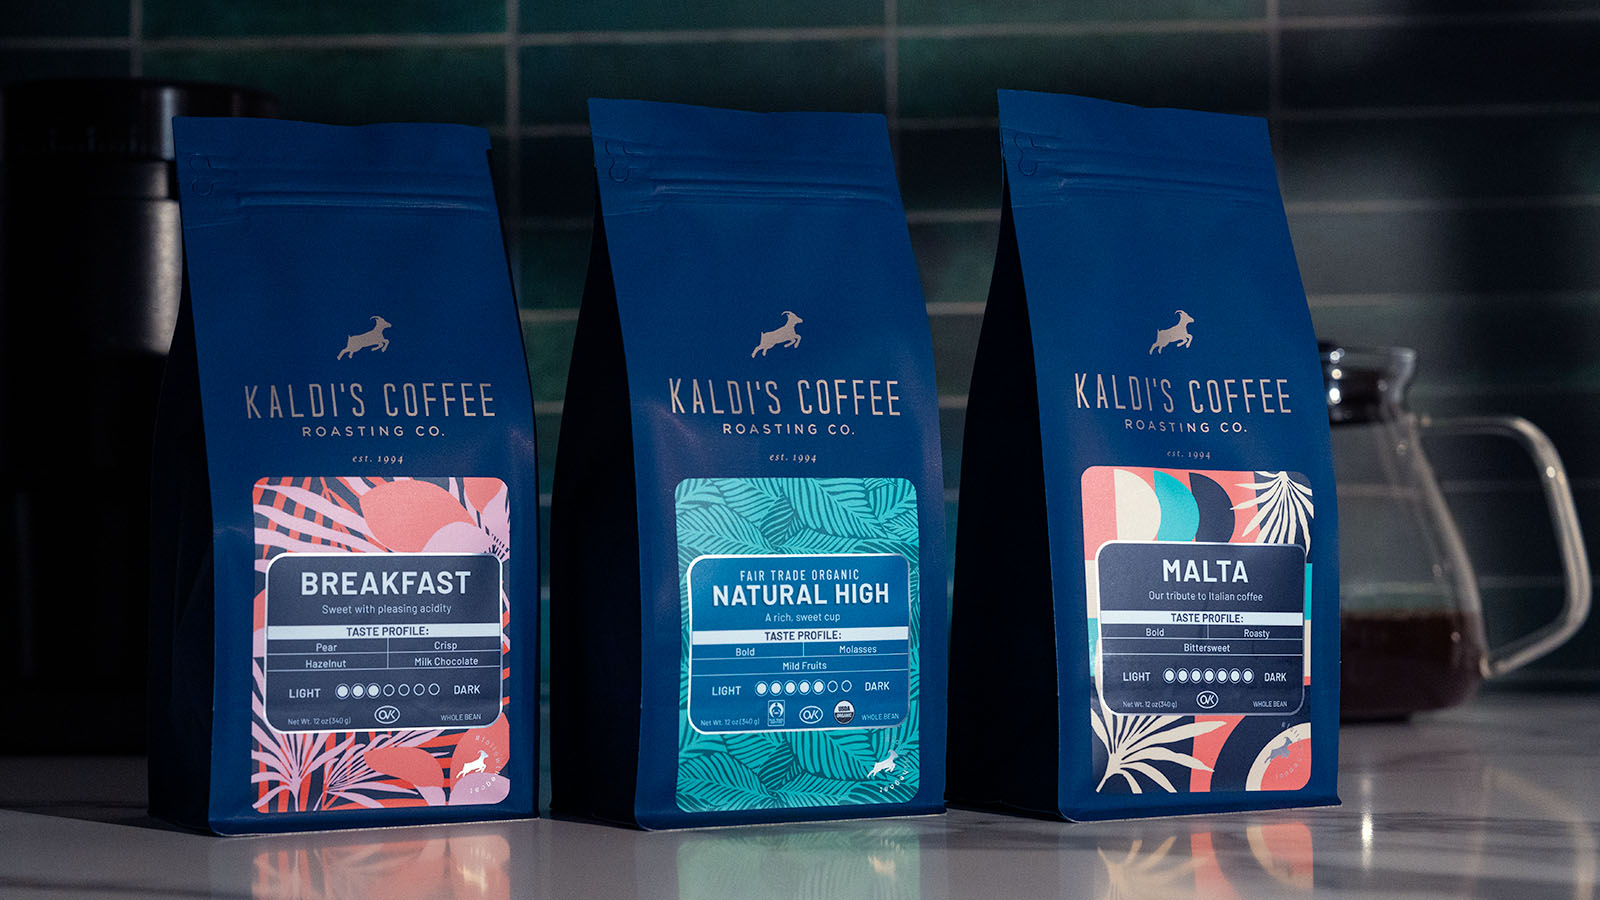 3 Kaldi's Coffee blends in navy bags with varying roast levels